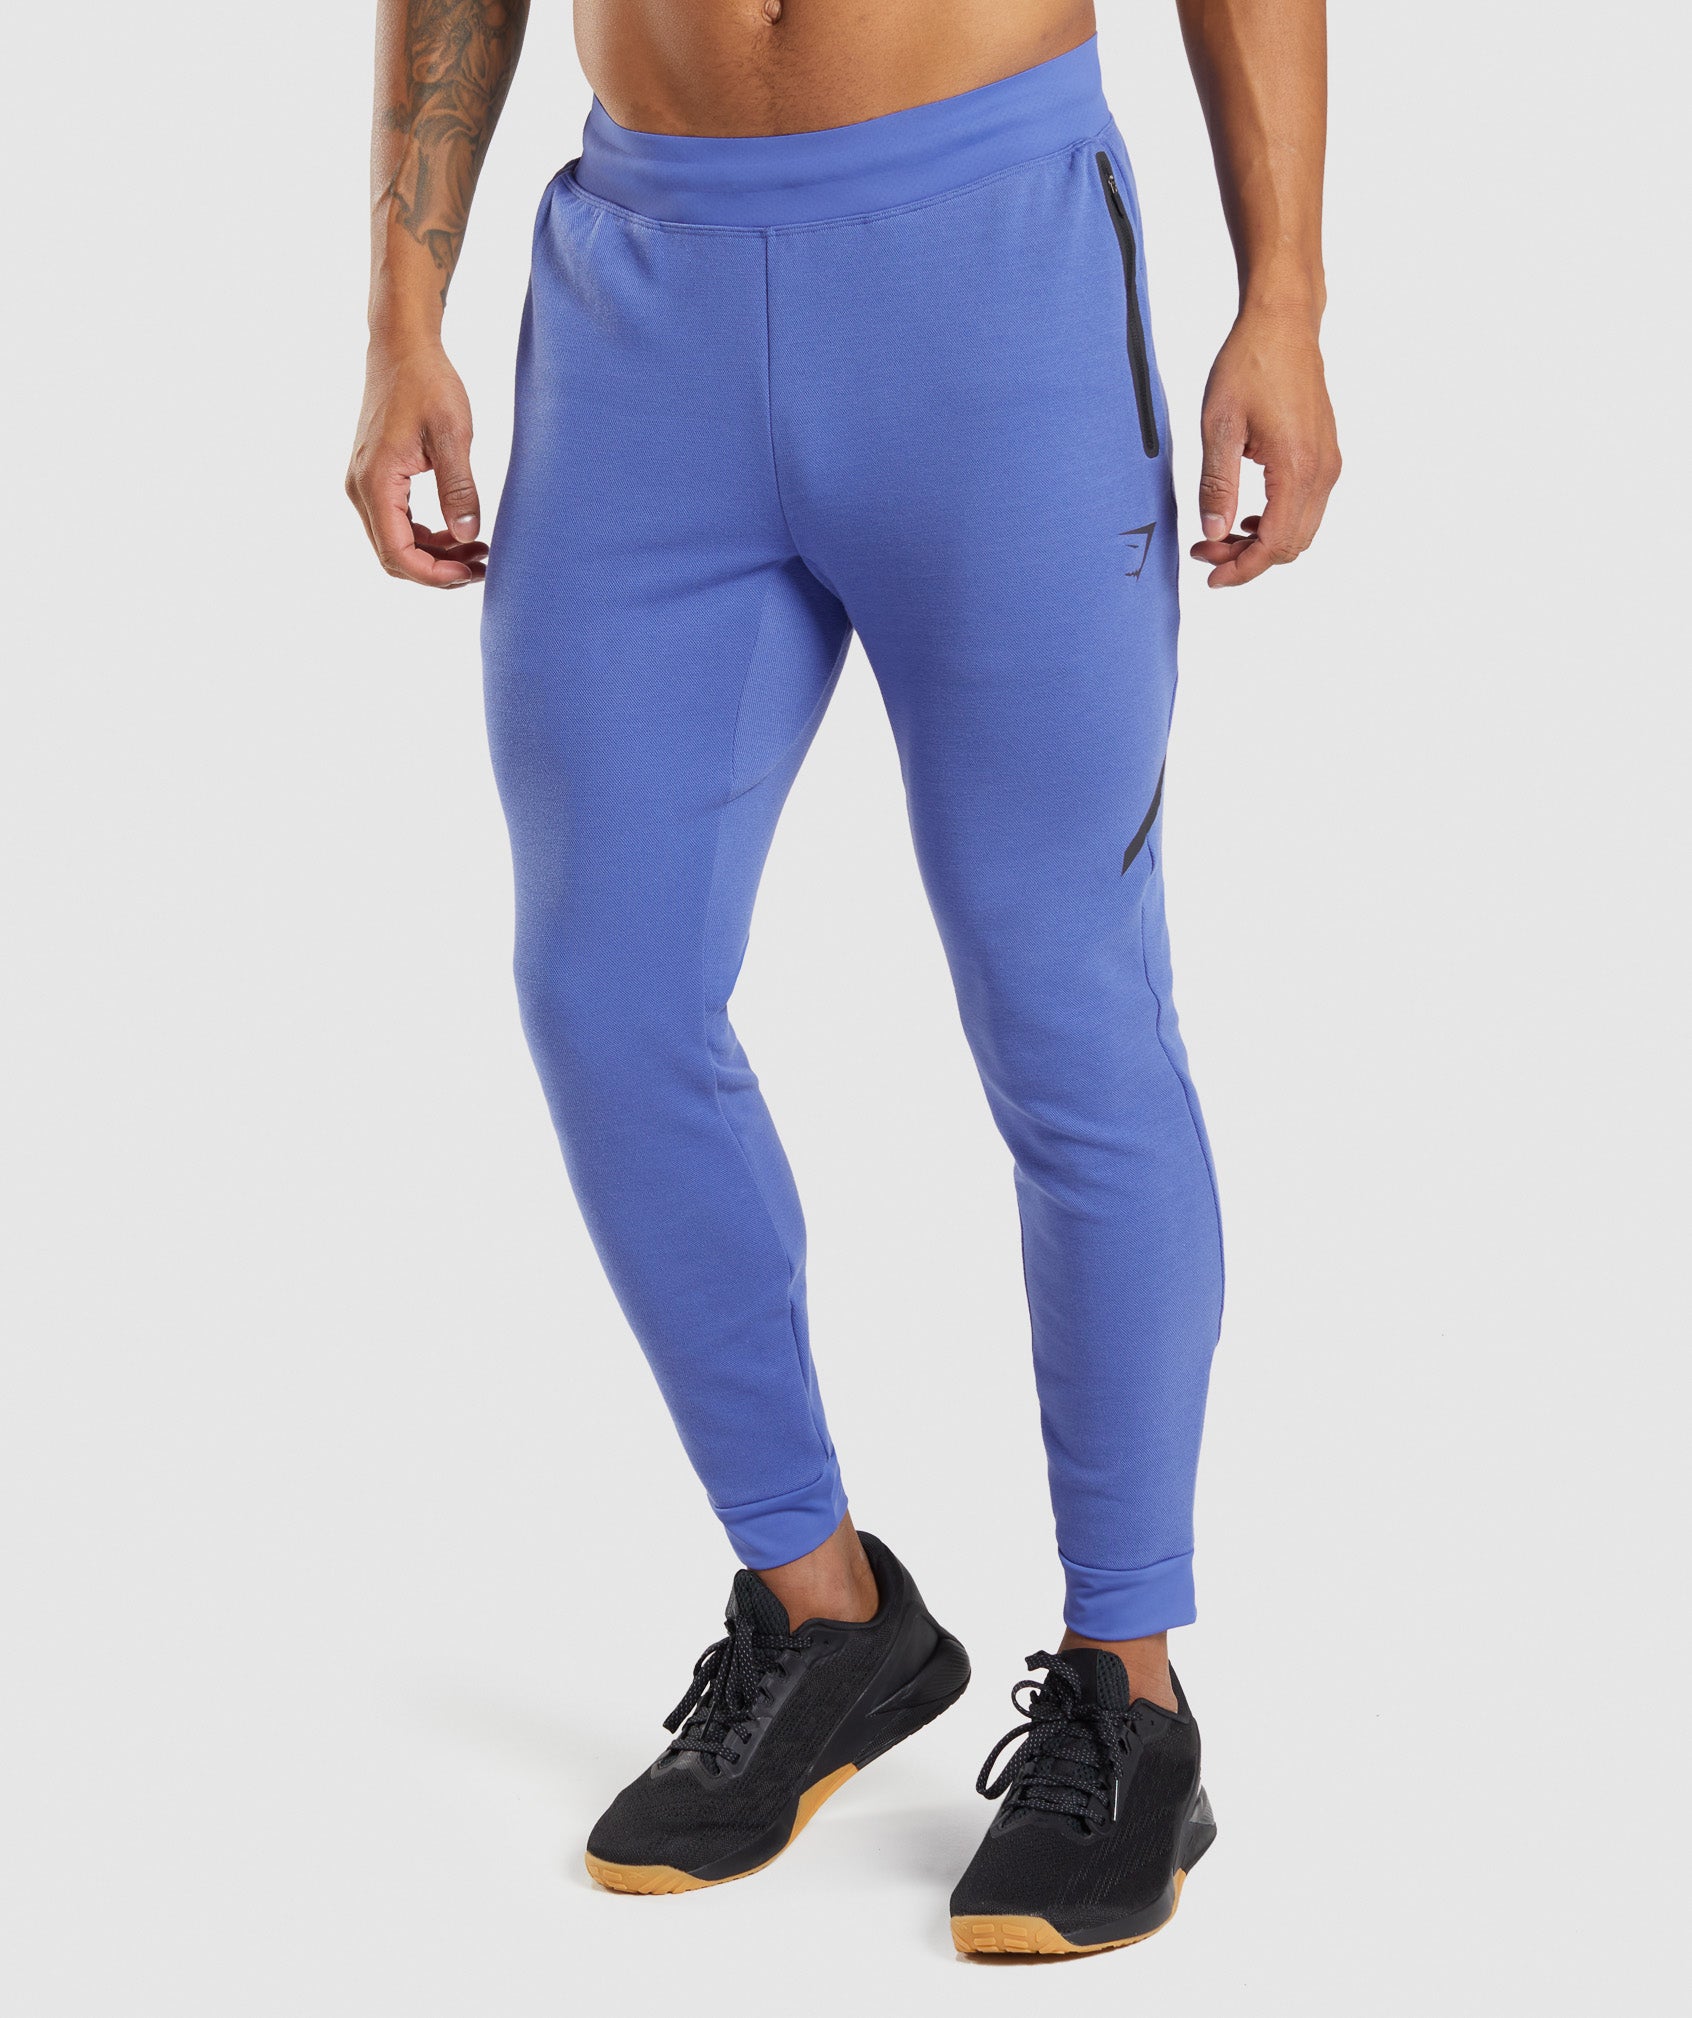 Gymshark Navy Blue Apex Leggings Size M - $42 (35% Off Retail) - From  Kimberley